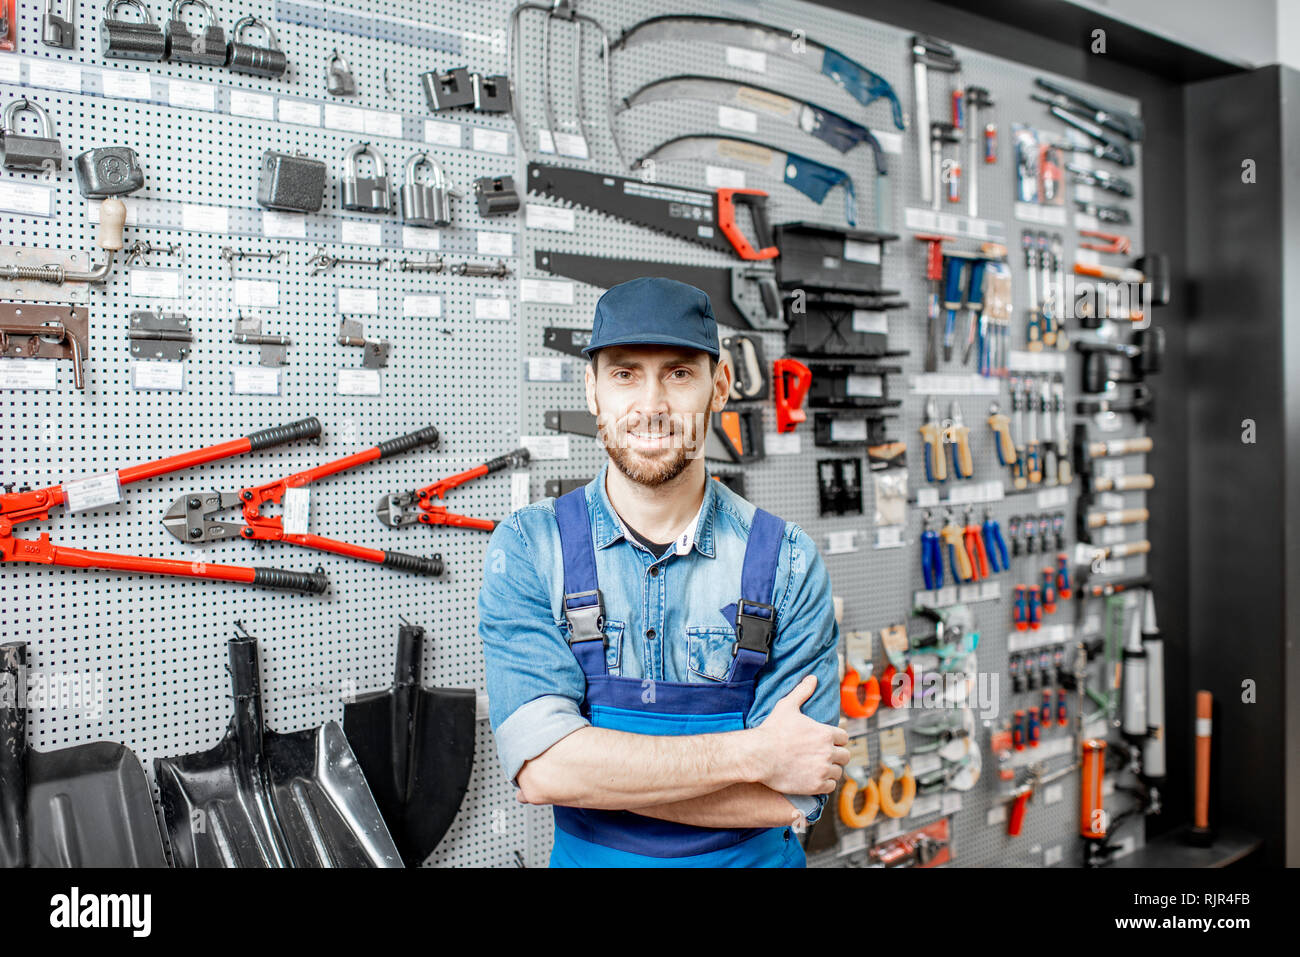 Portrait of a handsome worker in uniform standing in the shop with garden equipment on the background Stock Photo